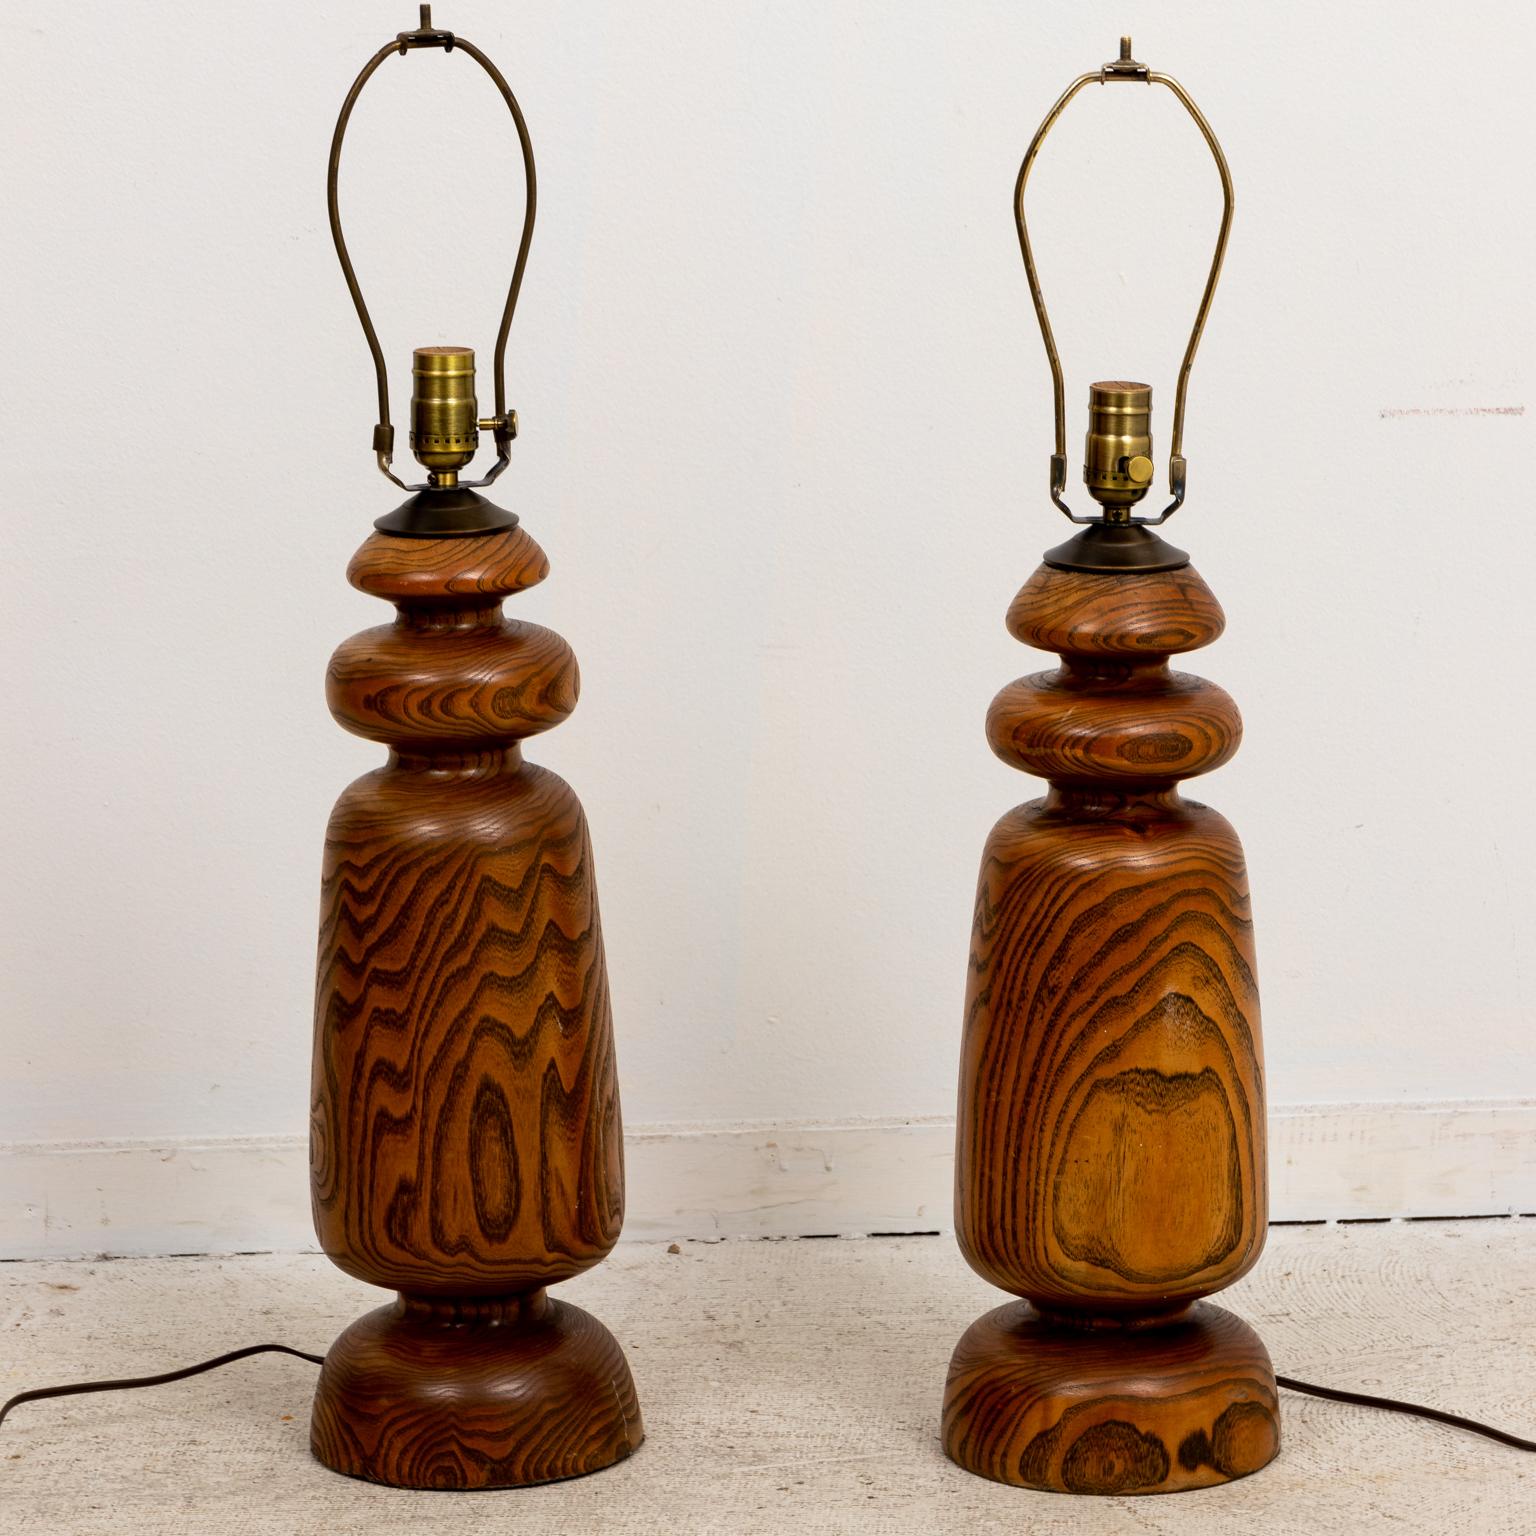 Pair of wood bulb turned table lamps. Shades not included. Please note of wear consistent with age.